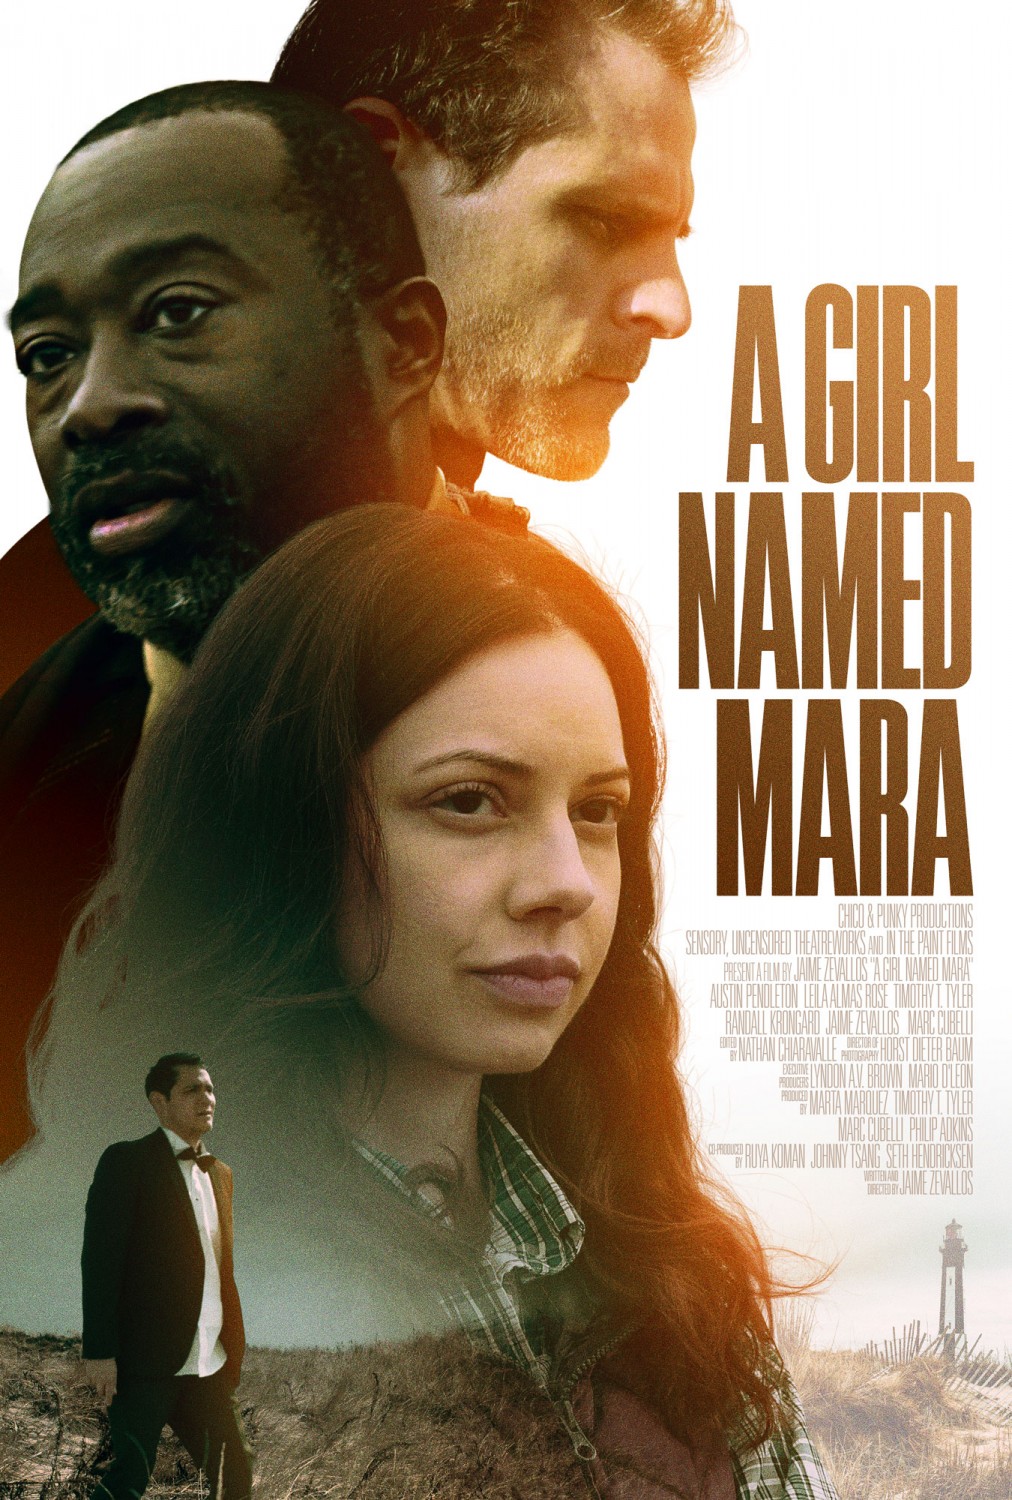 Extra Large Movie Poster Image for A Girl Named Mara